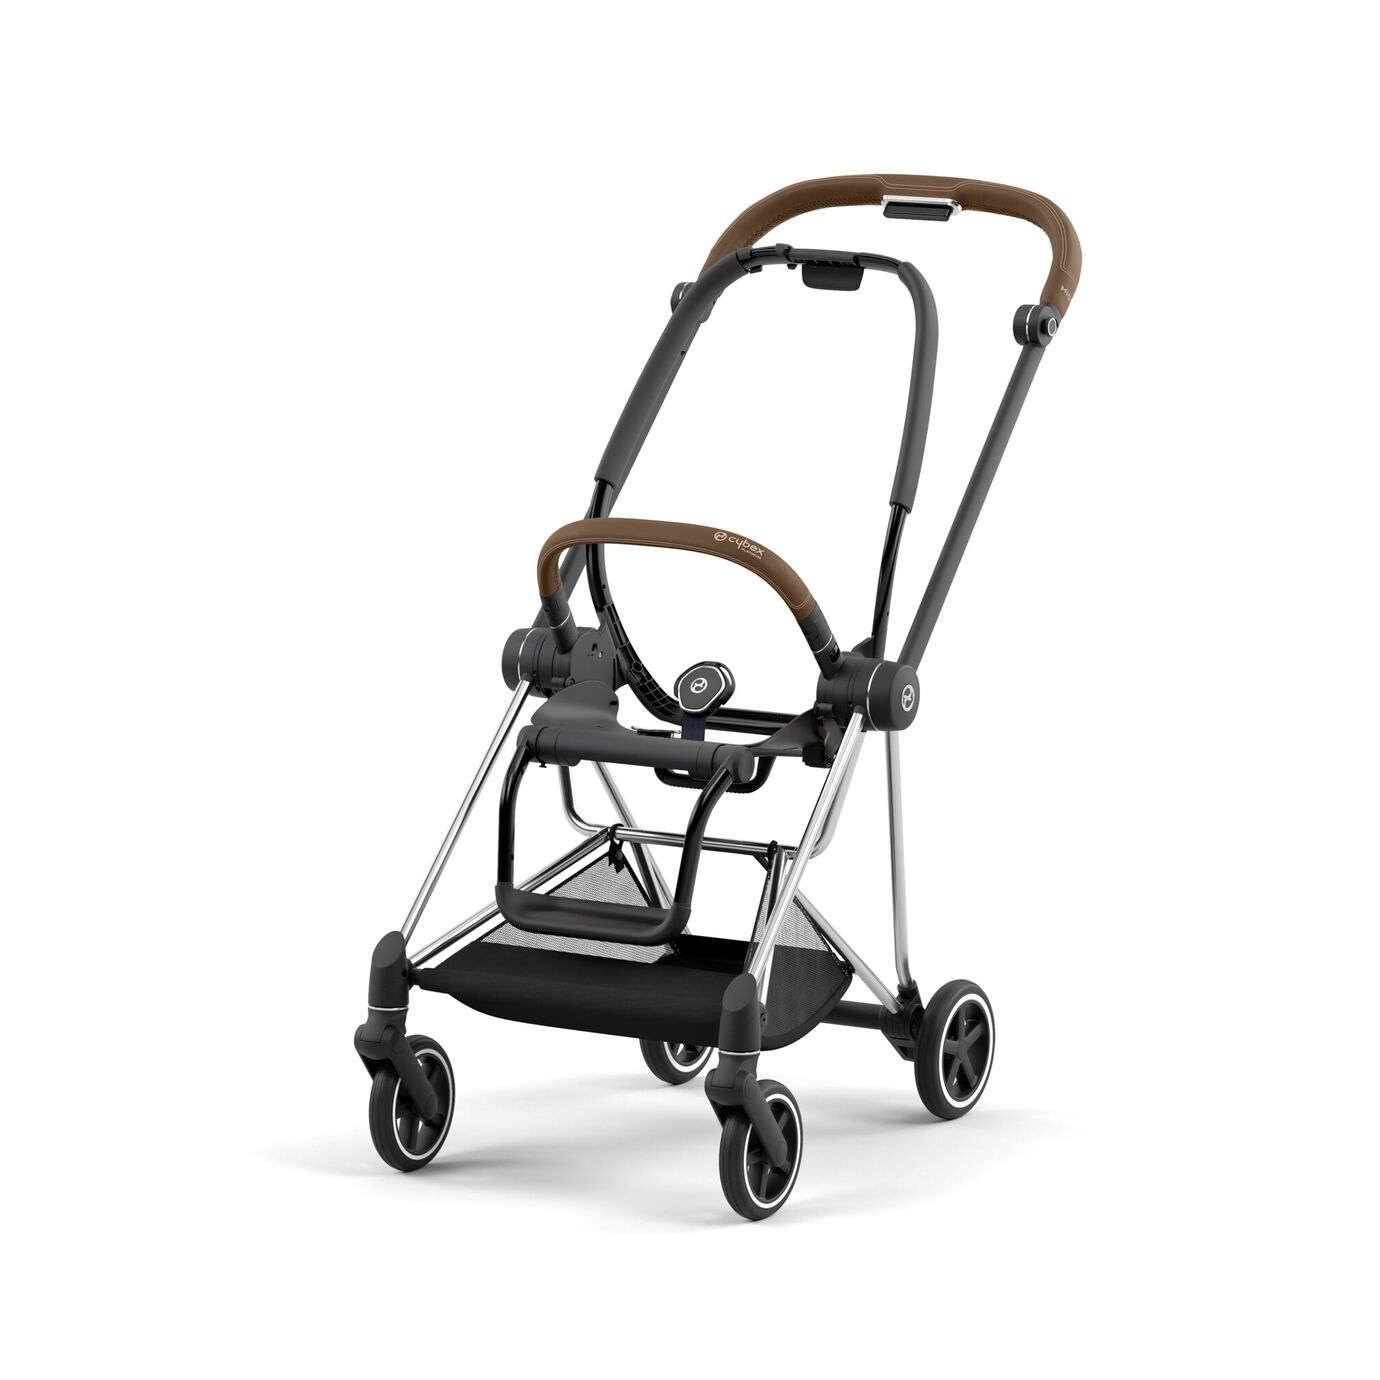 Cybex - Mios Poussette Jewels of Nature